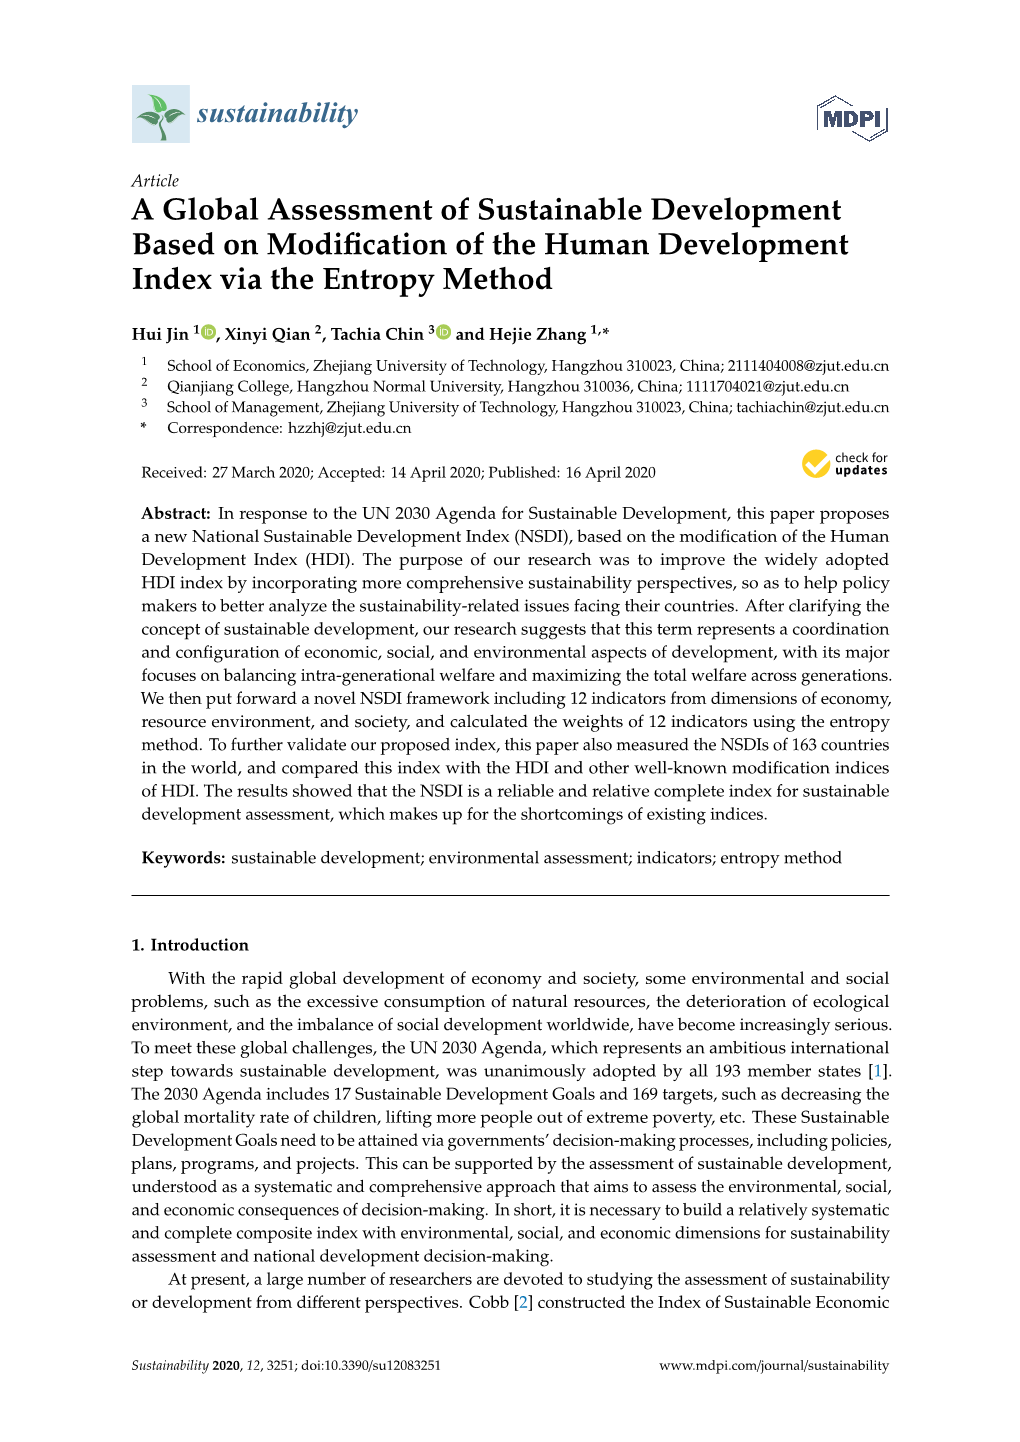 A Global Assessment of Sustainable Development Based on Modiﬁcation of the Human Development Index Via the Entropy Method